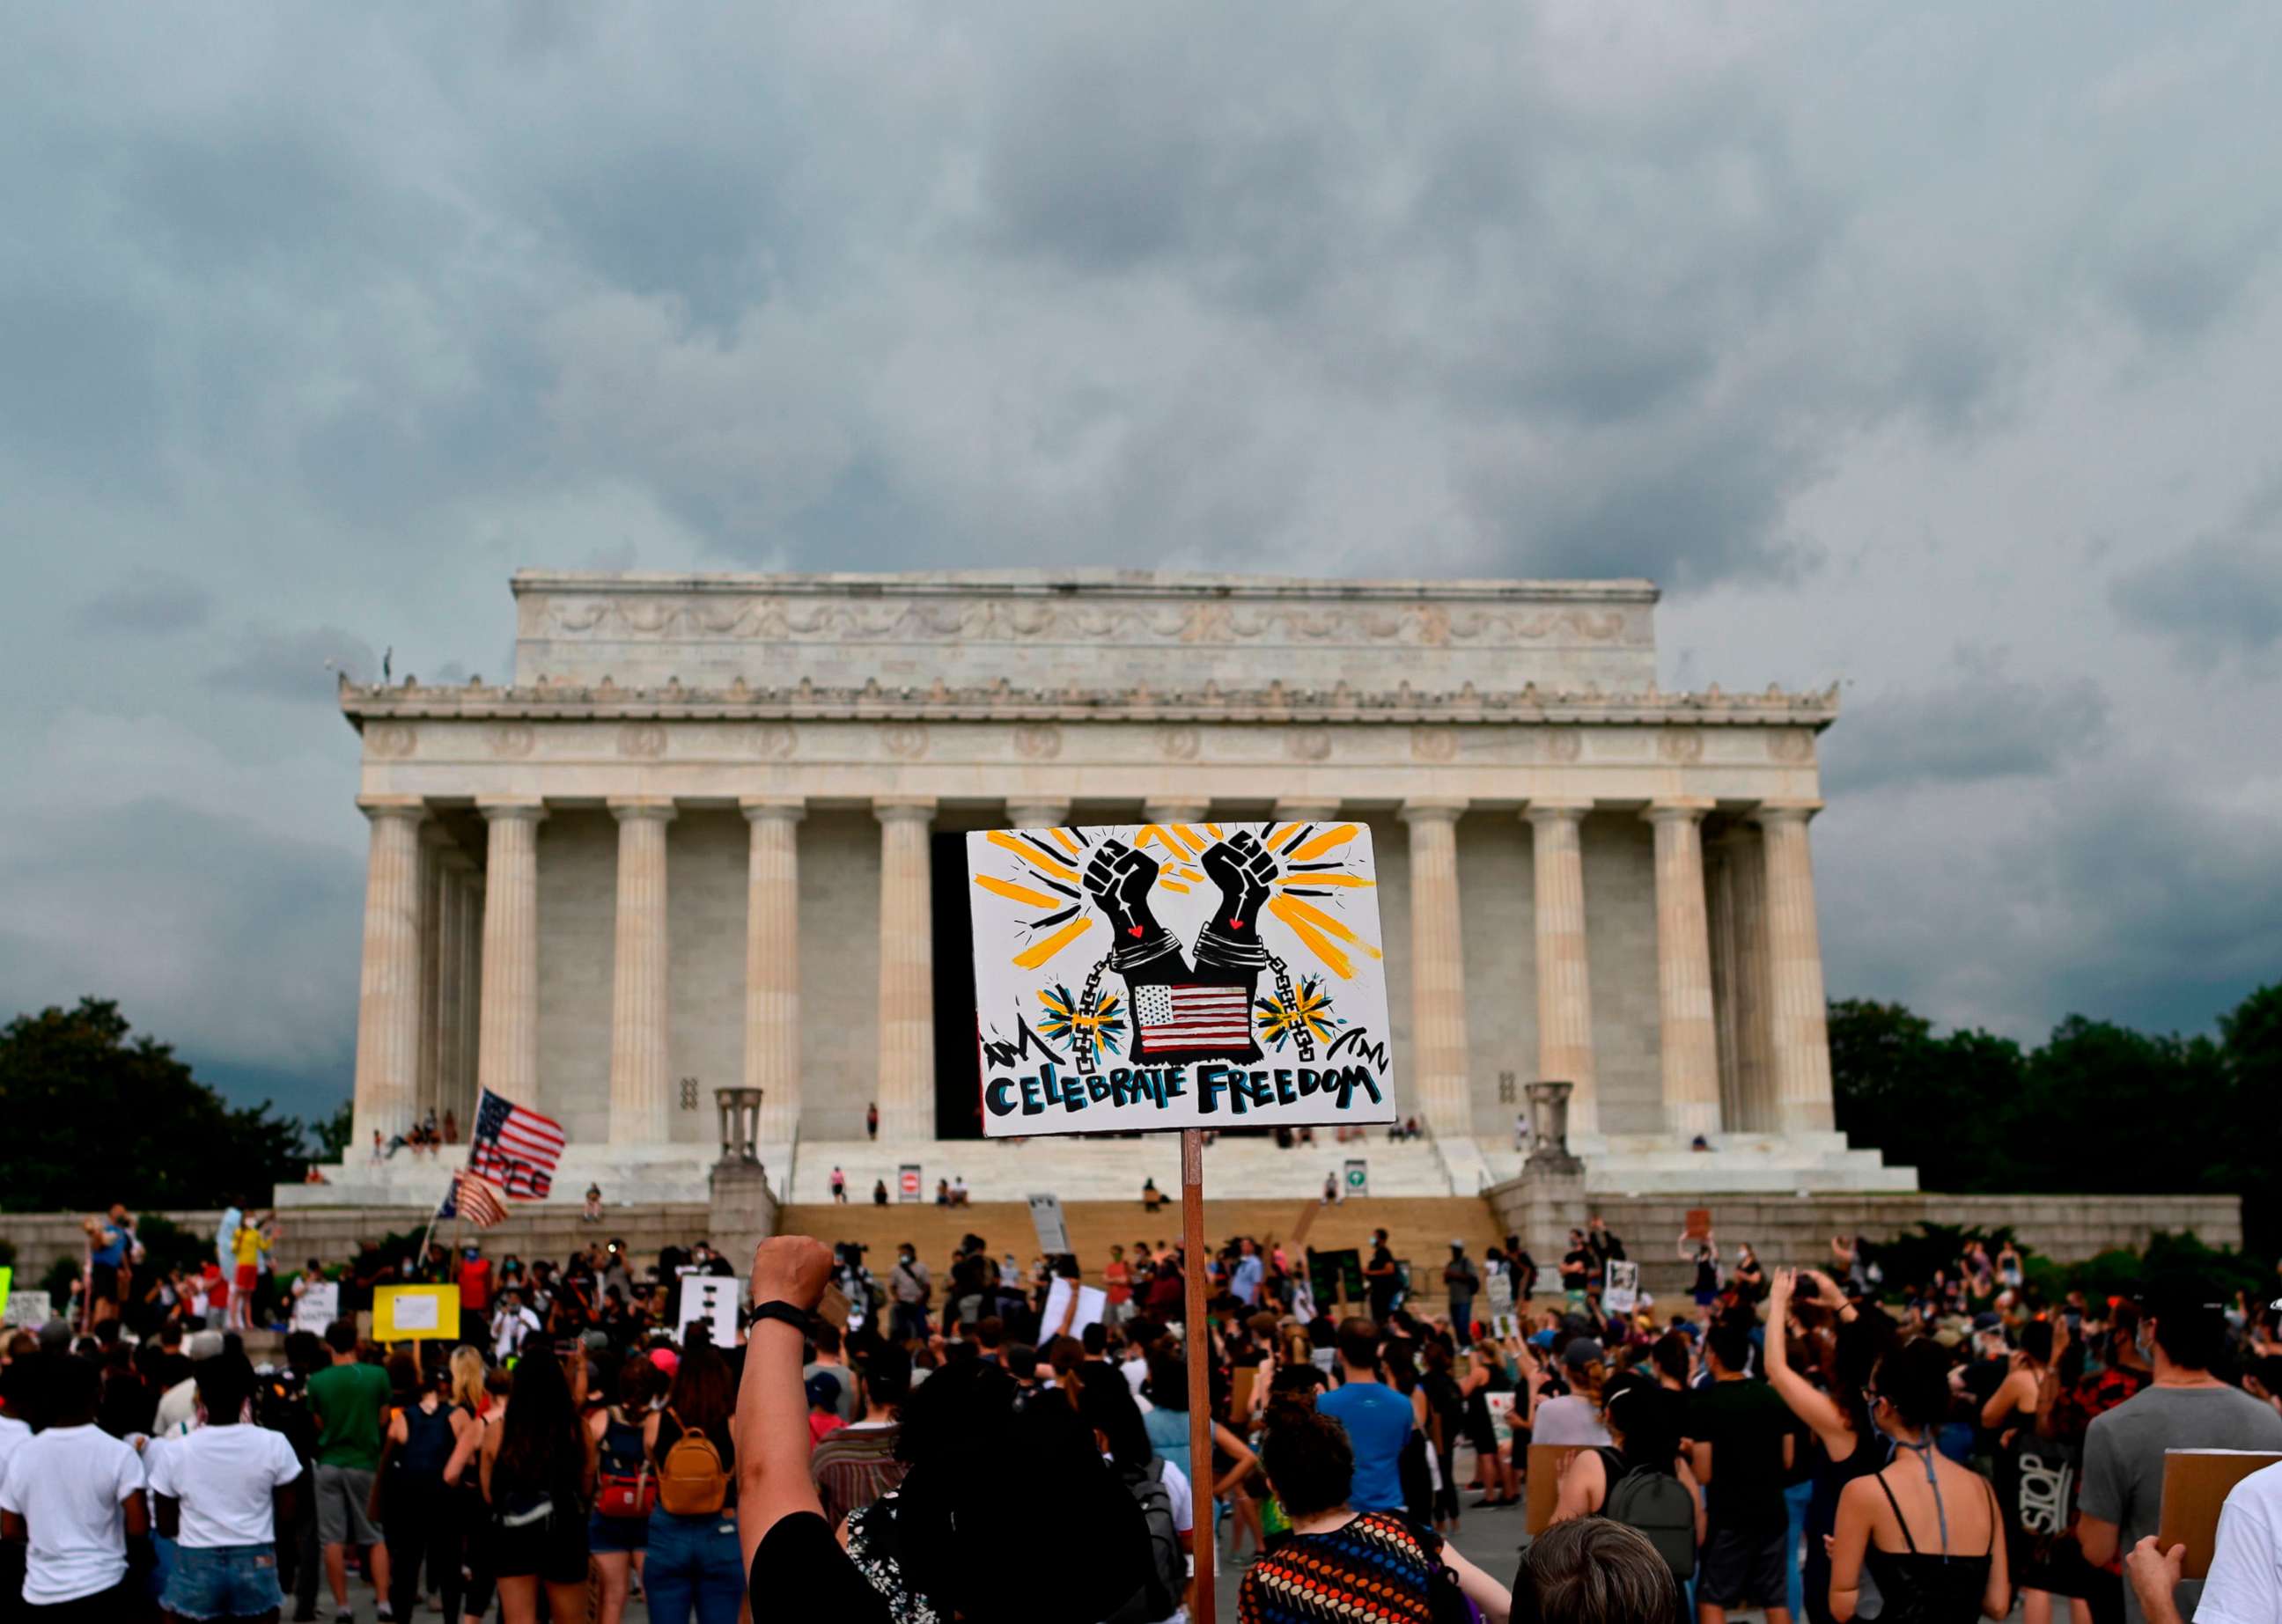 PHOTO: Demonstrators hold signs as they take part in a Juneteenth march and rally in front of the Lincoln Memorial, in Washington, June 19, 2020.